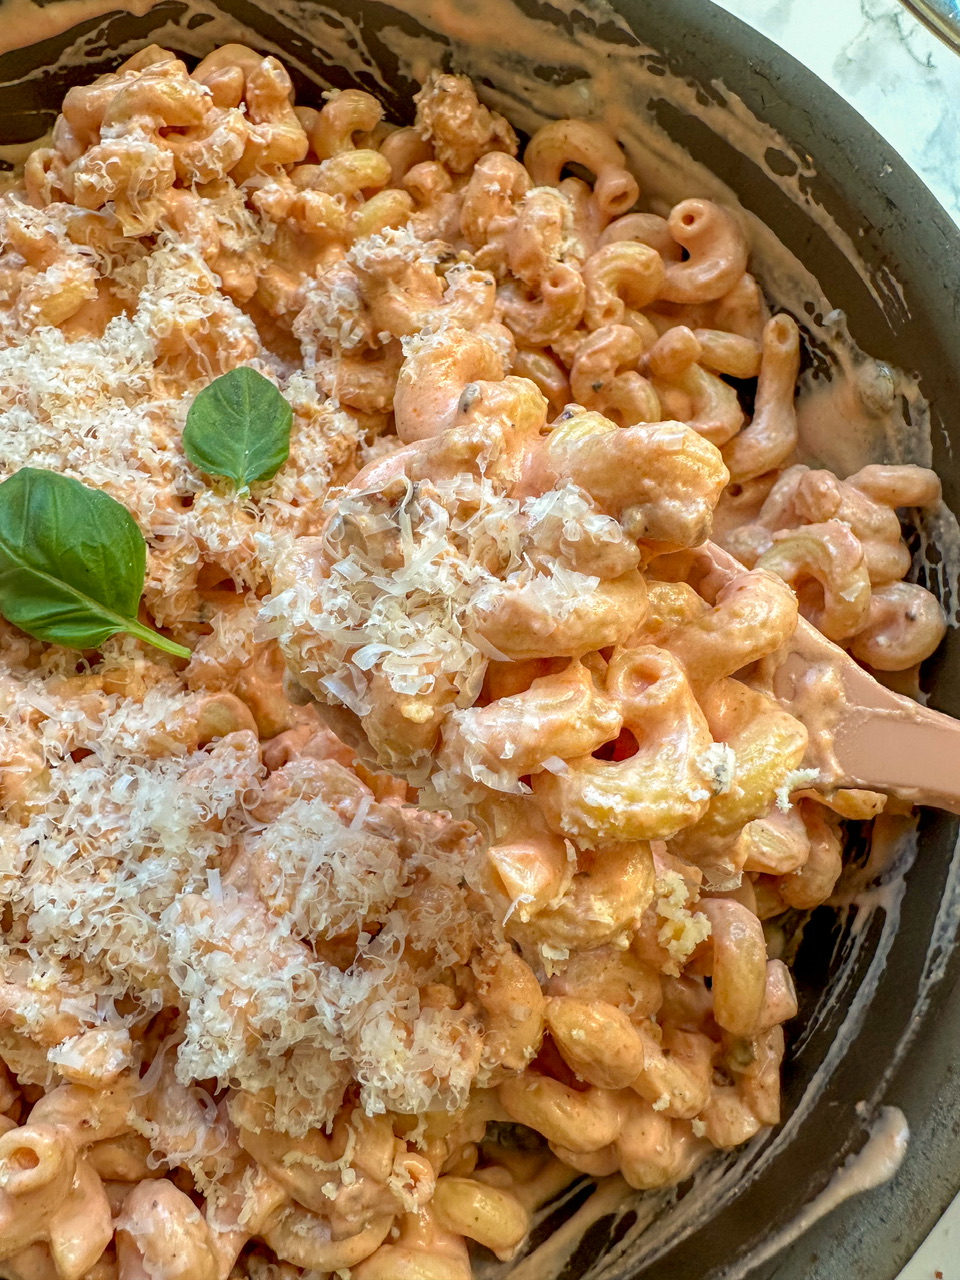 High Protein Pasta sauce made with cottage cheese